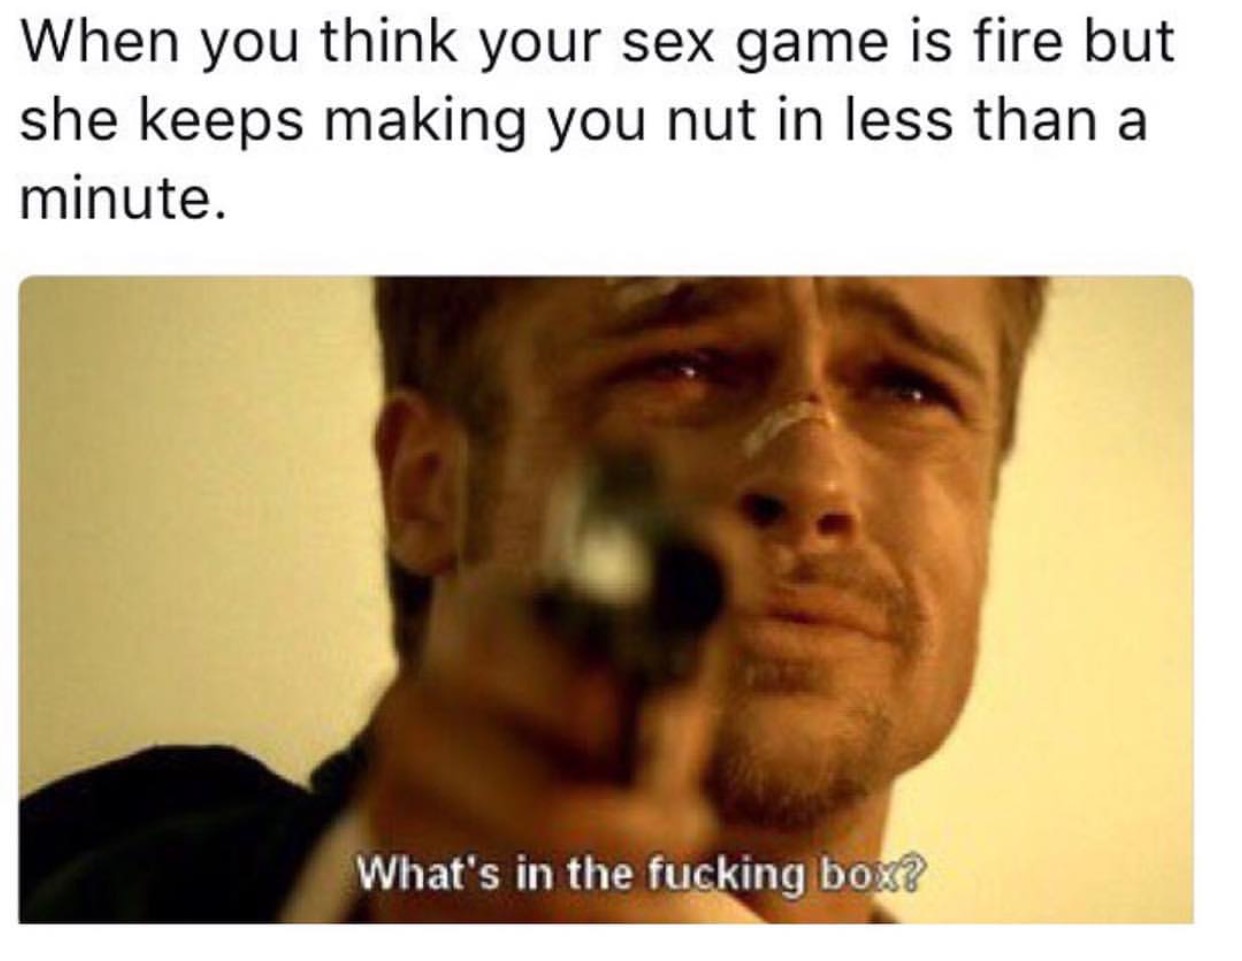 se7en film - When you think your sex game is fire but she keeps making you nut in less than a minute. What's in the fucking box?